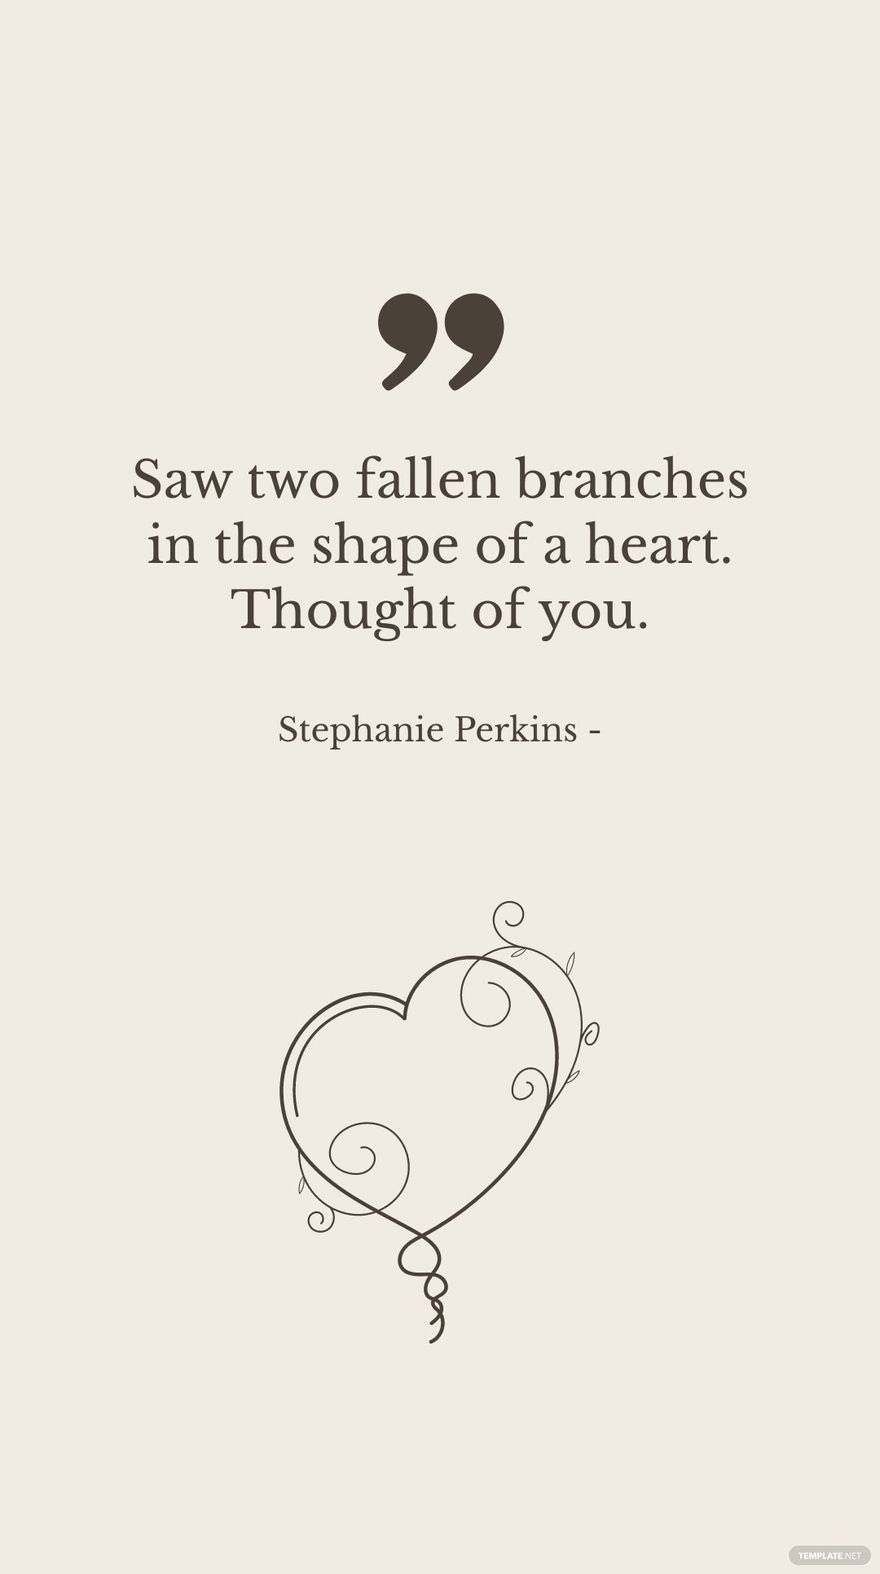 Stephanie Perkins - Saw two fallen branches in the shape of a heart. Thought of you.